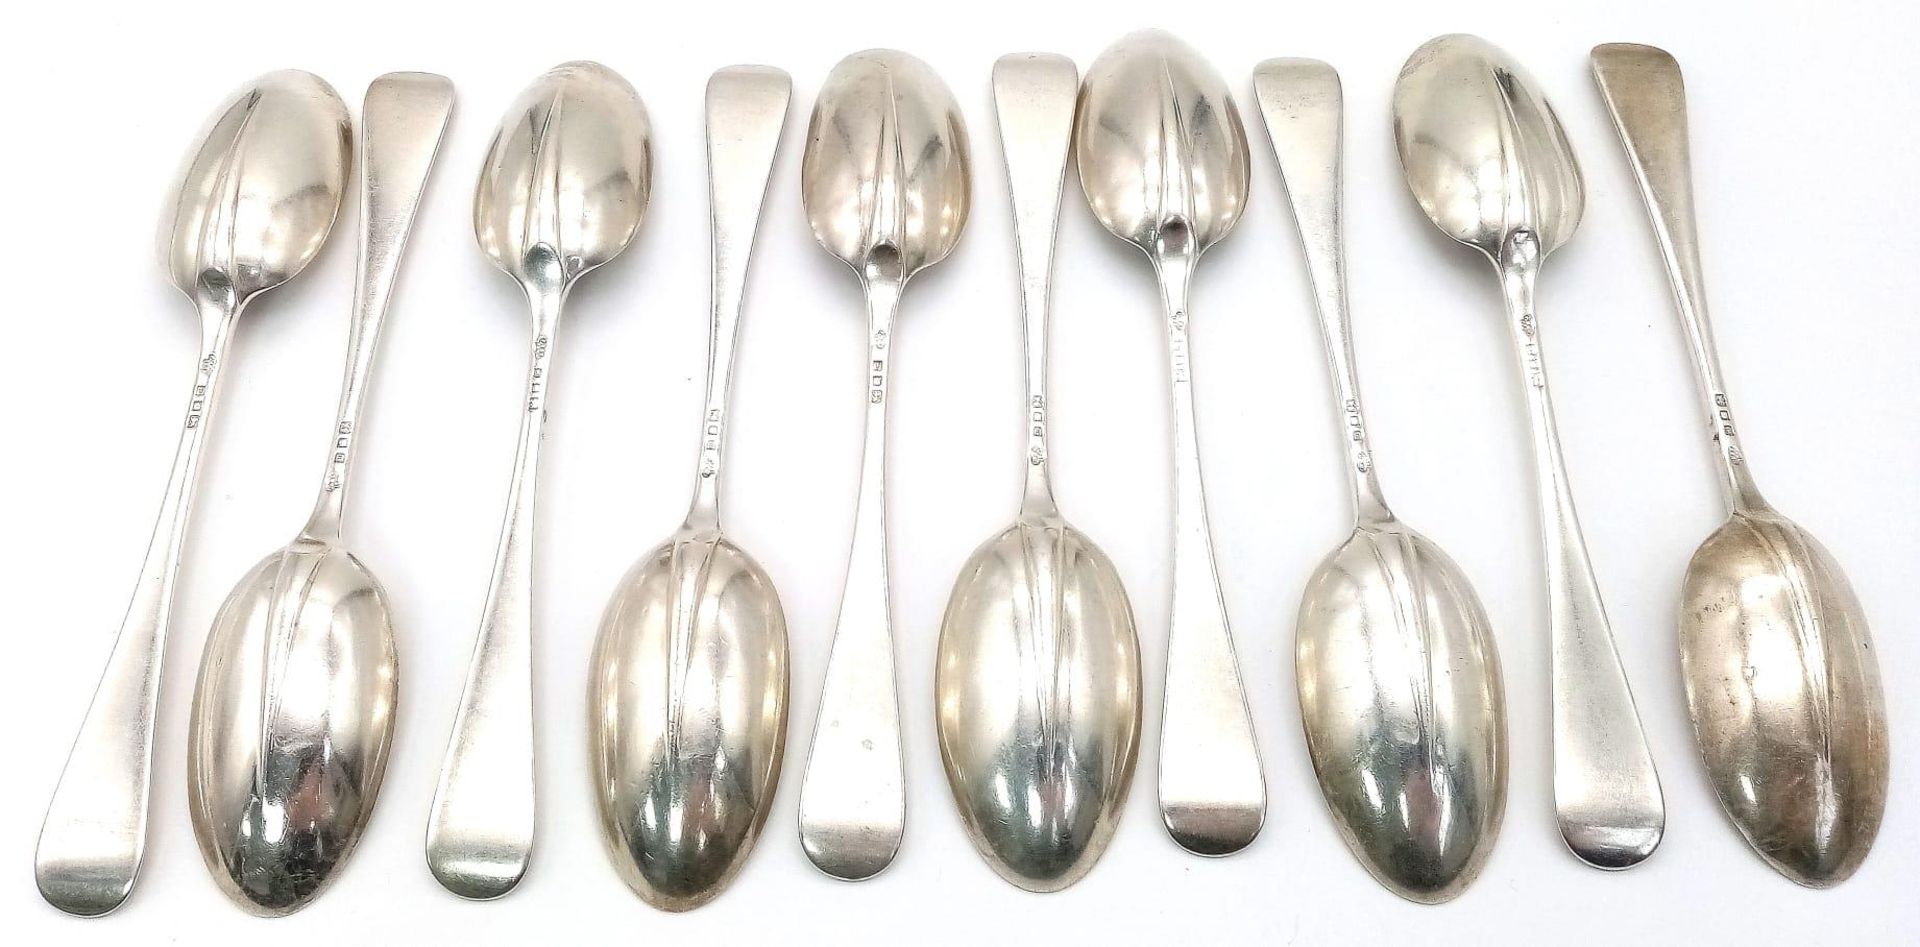 Ten Mid-Size Sterling Silver Antique Spoons. 17cm. 546g total weight. Hallmarks for London 1924. - Bild 2 aus 3